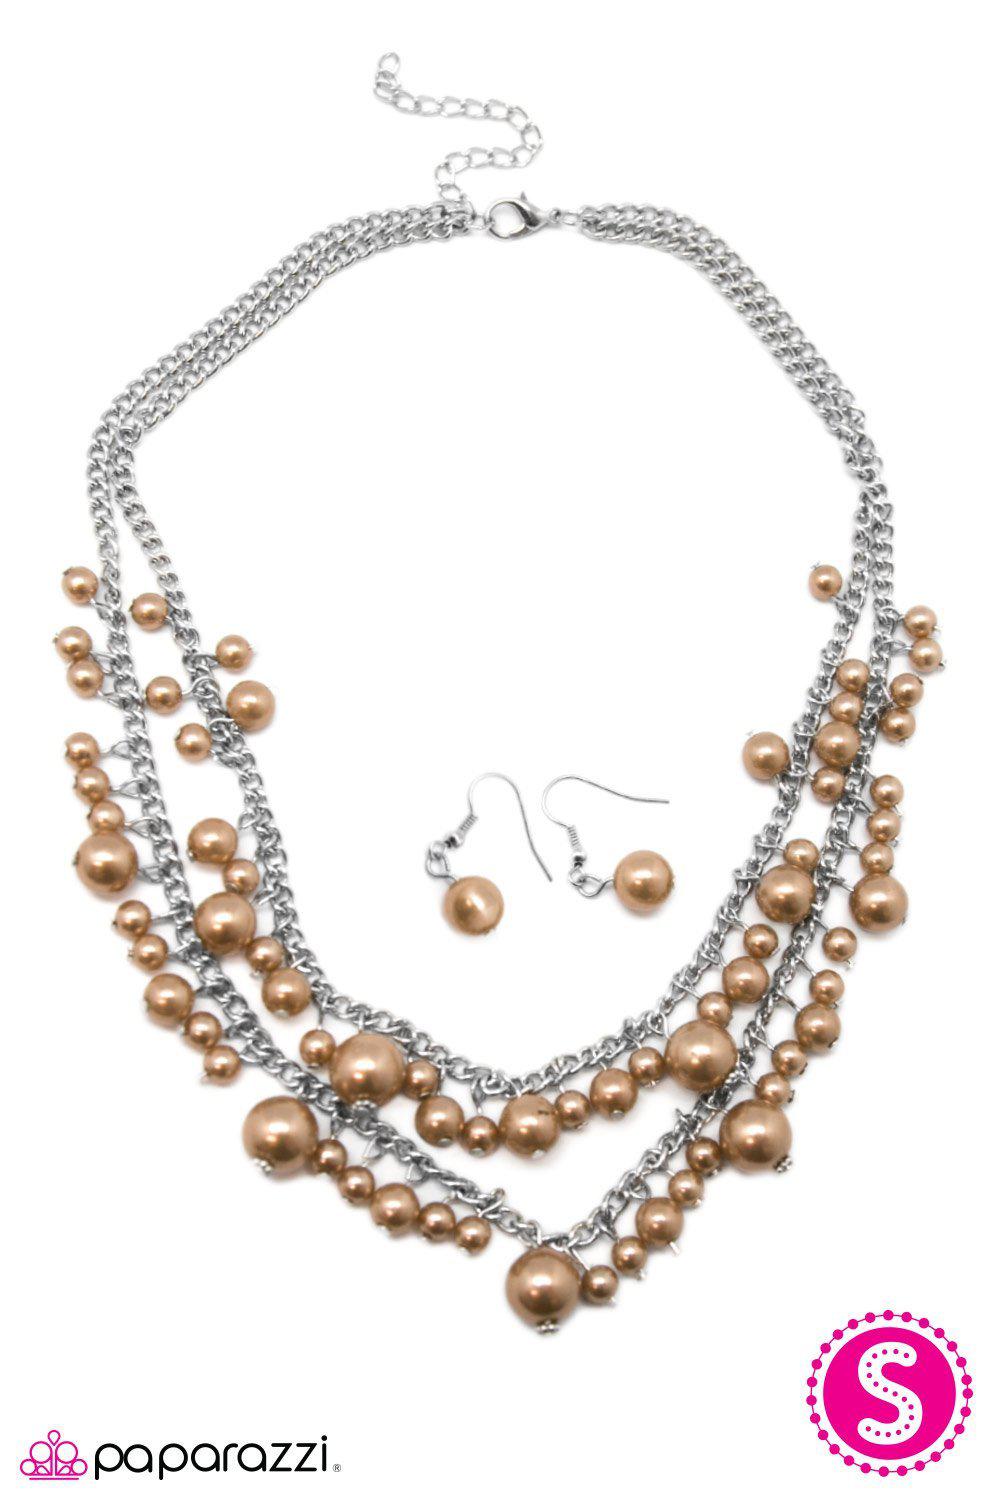 The Grand Banquet Brown Pearl Necklace - Paparazzi Accessories-CarasShop.com - $5 Jewelry by Cara Jewels